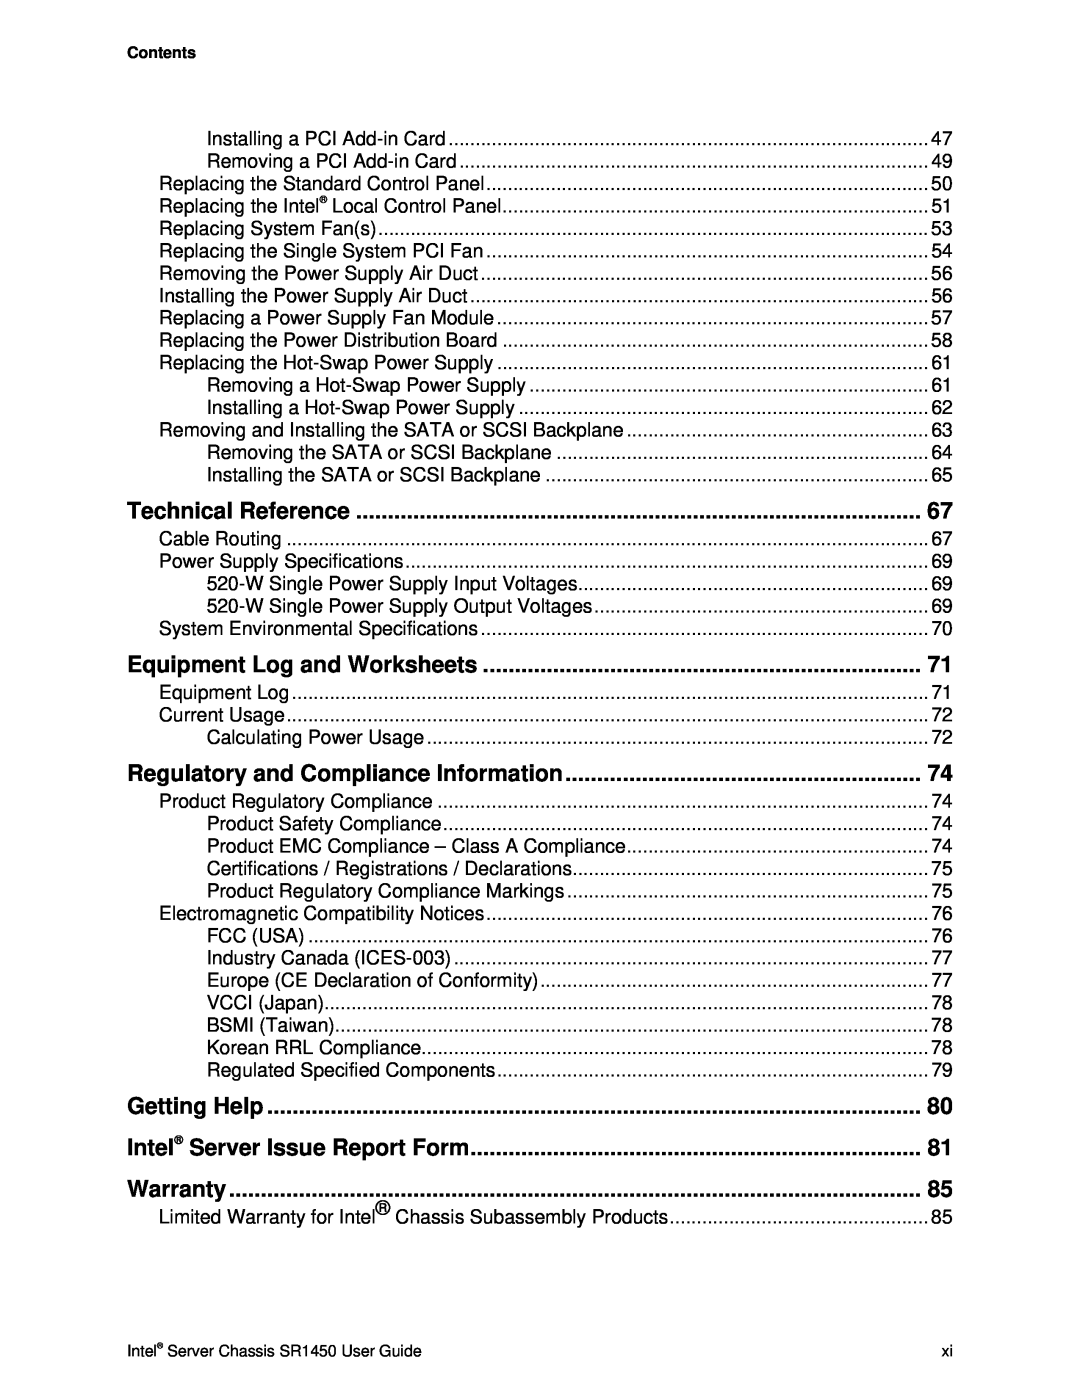 Intel SR1450 Equipment Log and Worksheets, Regulatory and Compliance Information, Intel Server Issue Report Form, Warranty 